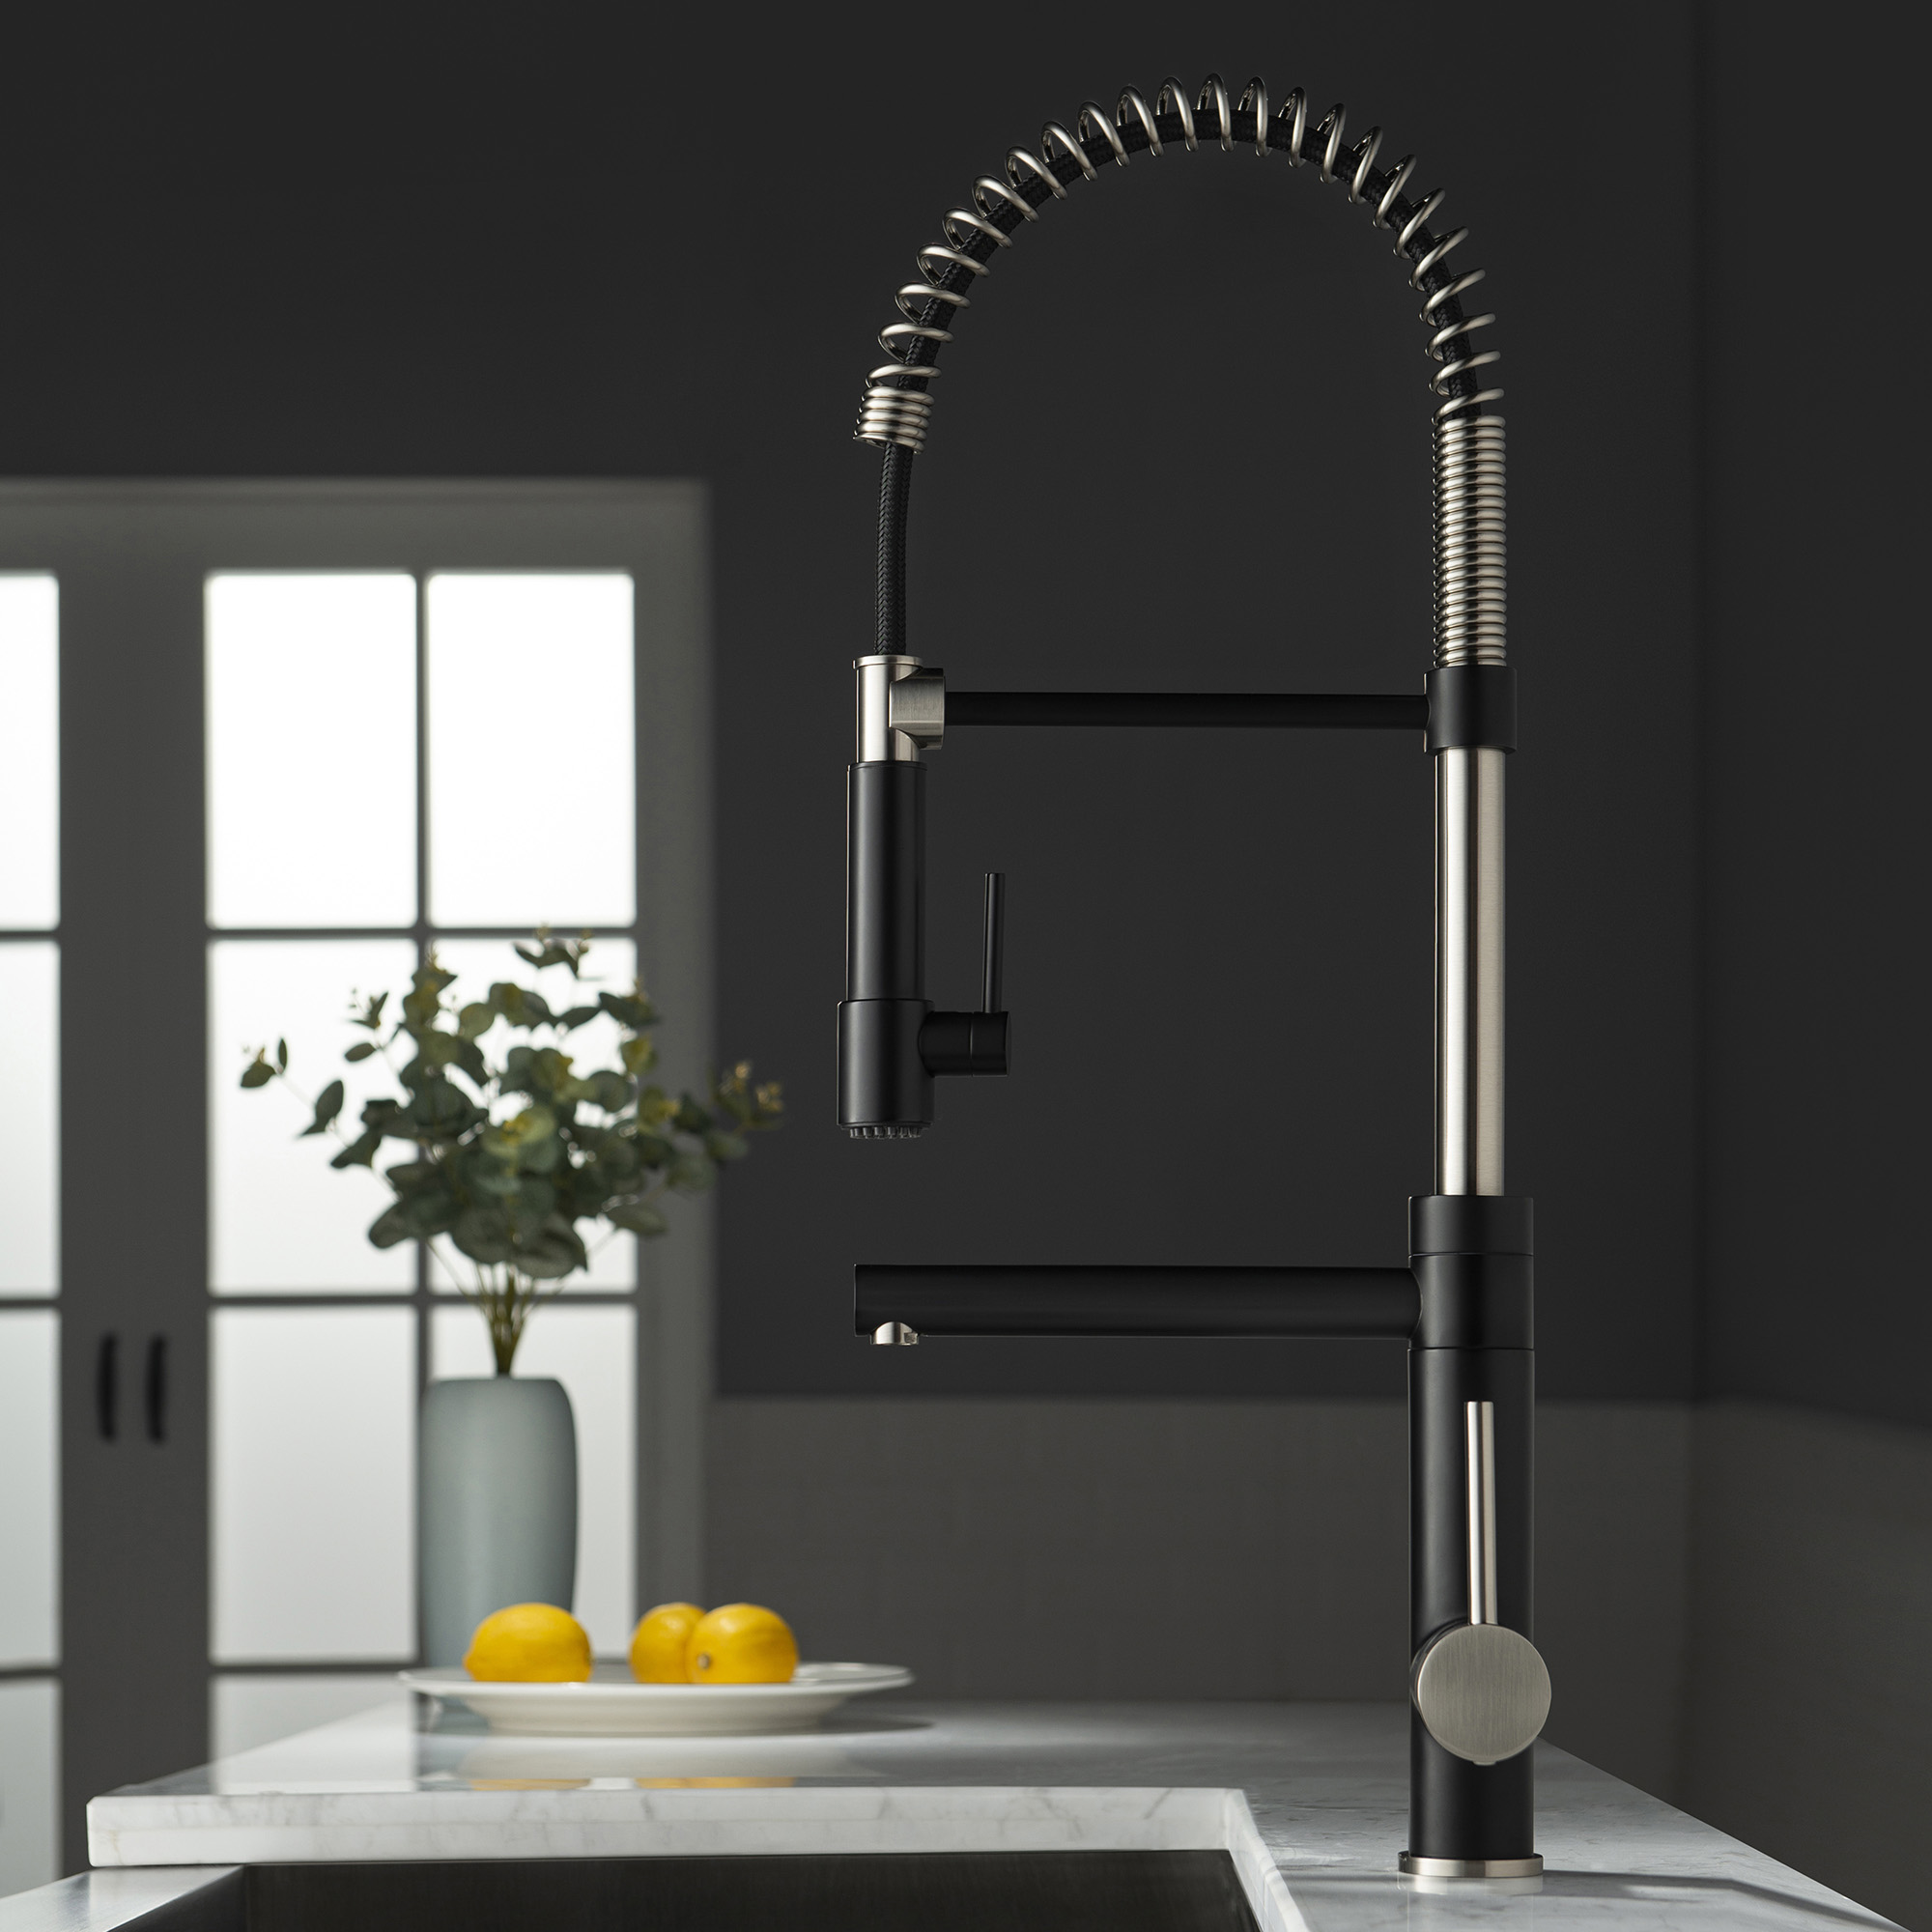 WOODBRIDGE WK060501BL Stainless Steel Single Handle Pre-Rinse Pull Down Kitchen Faucet and Pot Filler in Matte Black Finish.